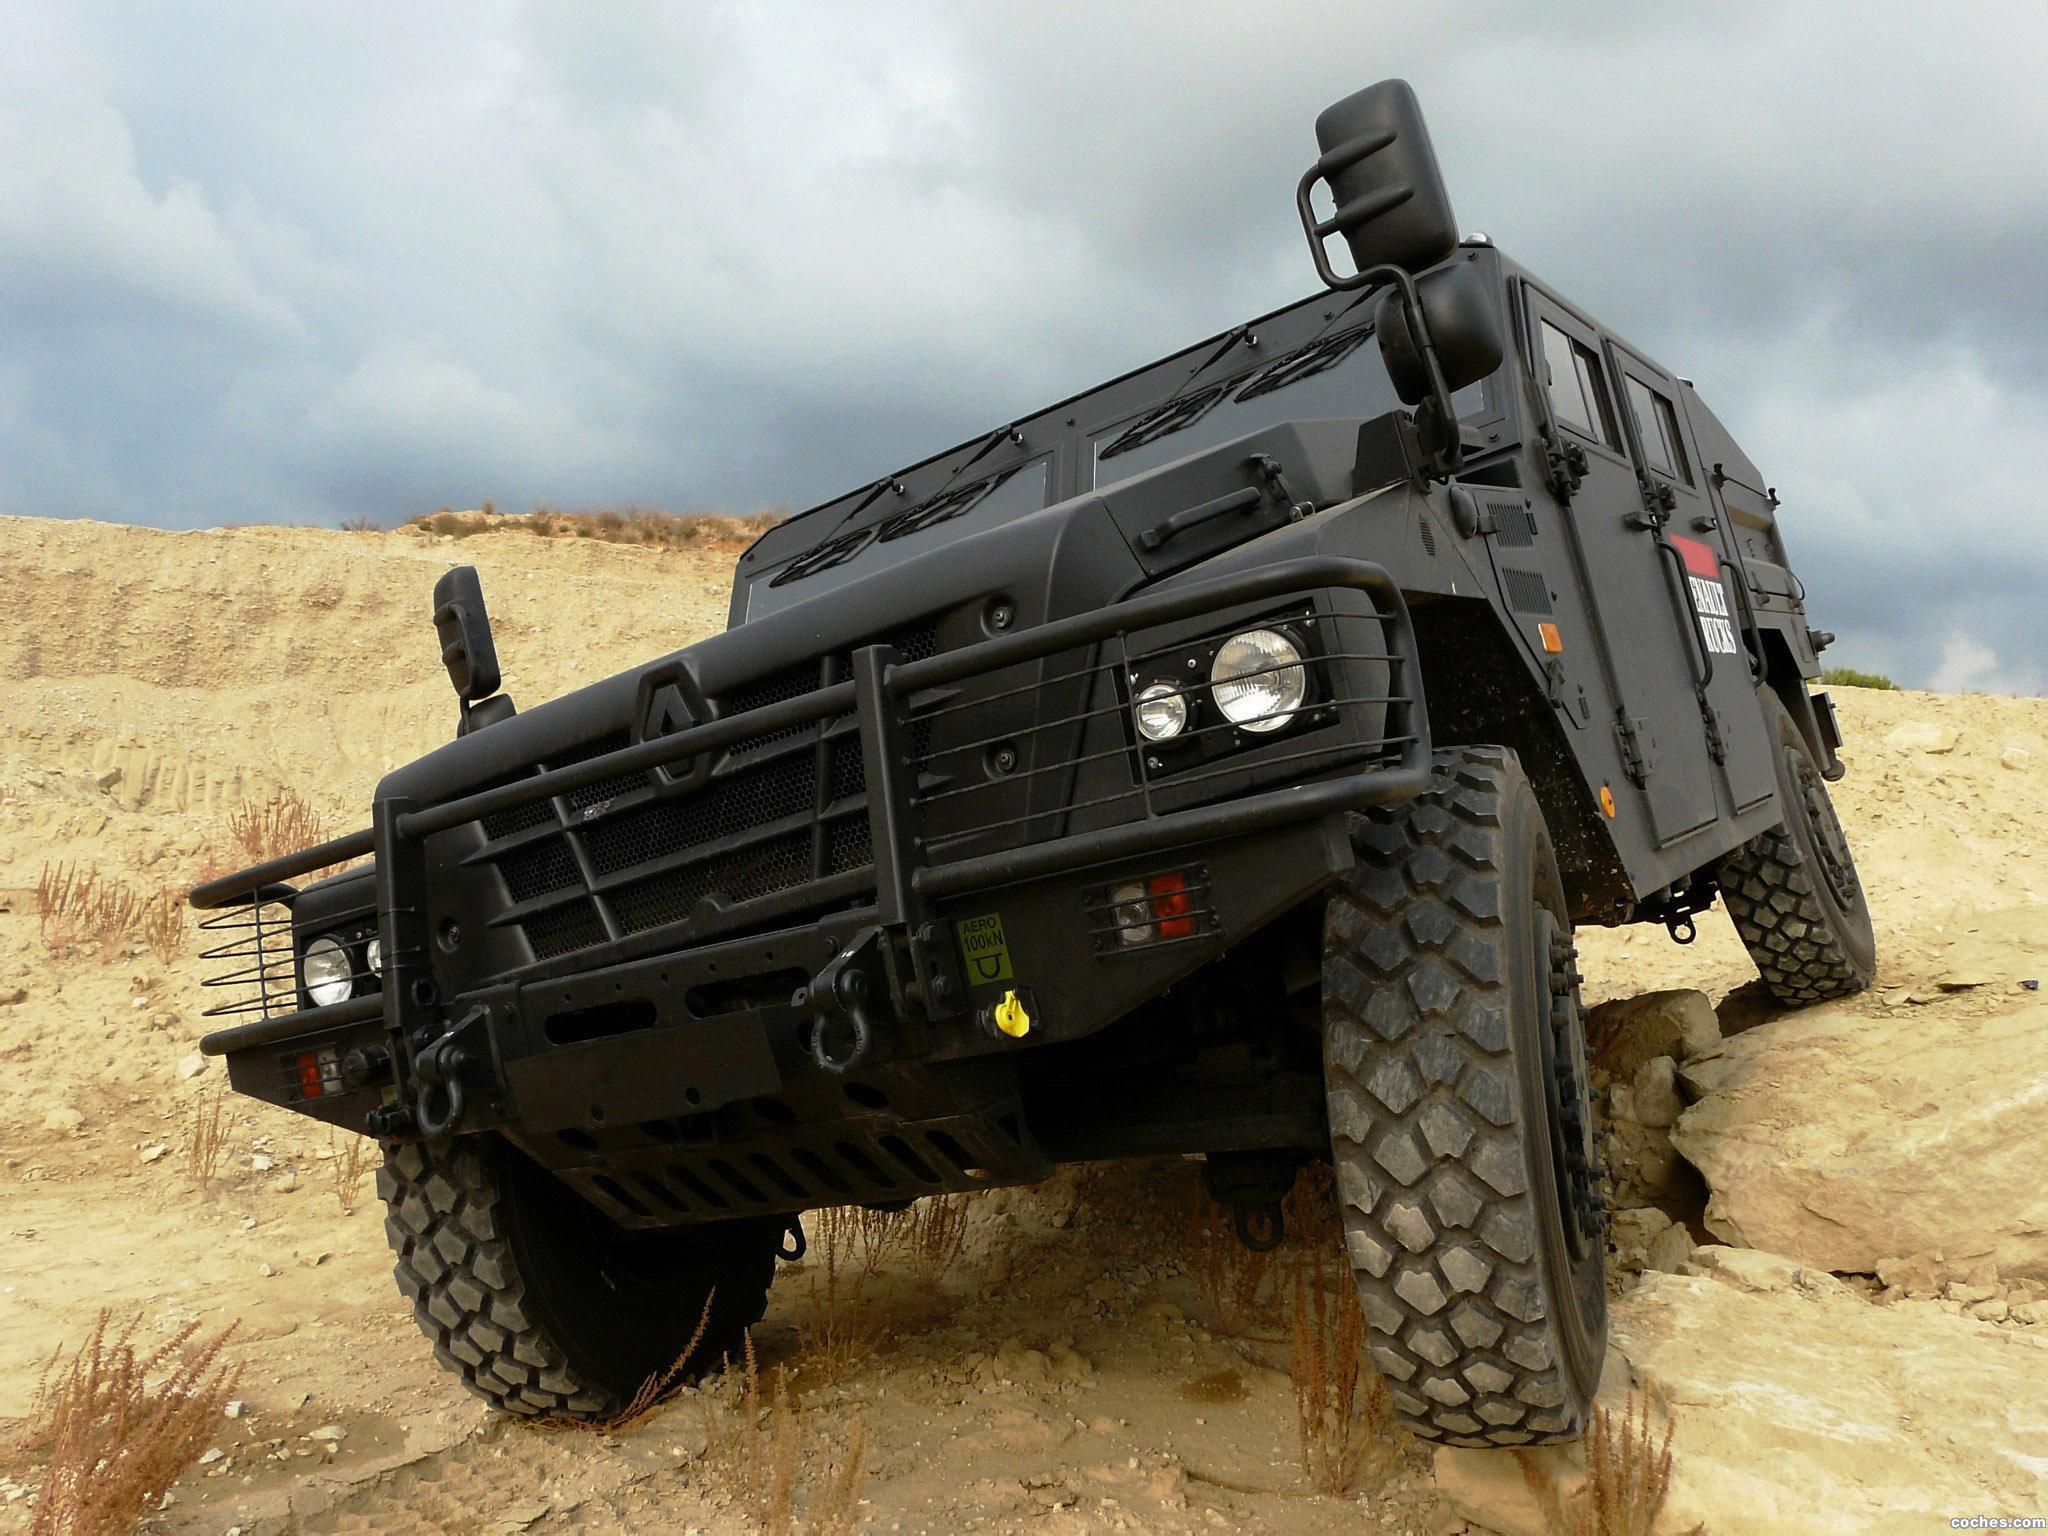 renault_sherpa-light-scout-2010_r1